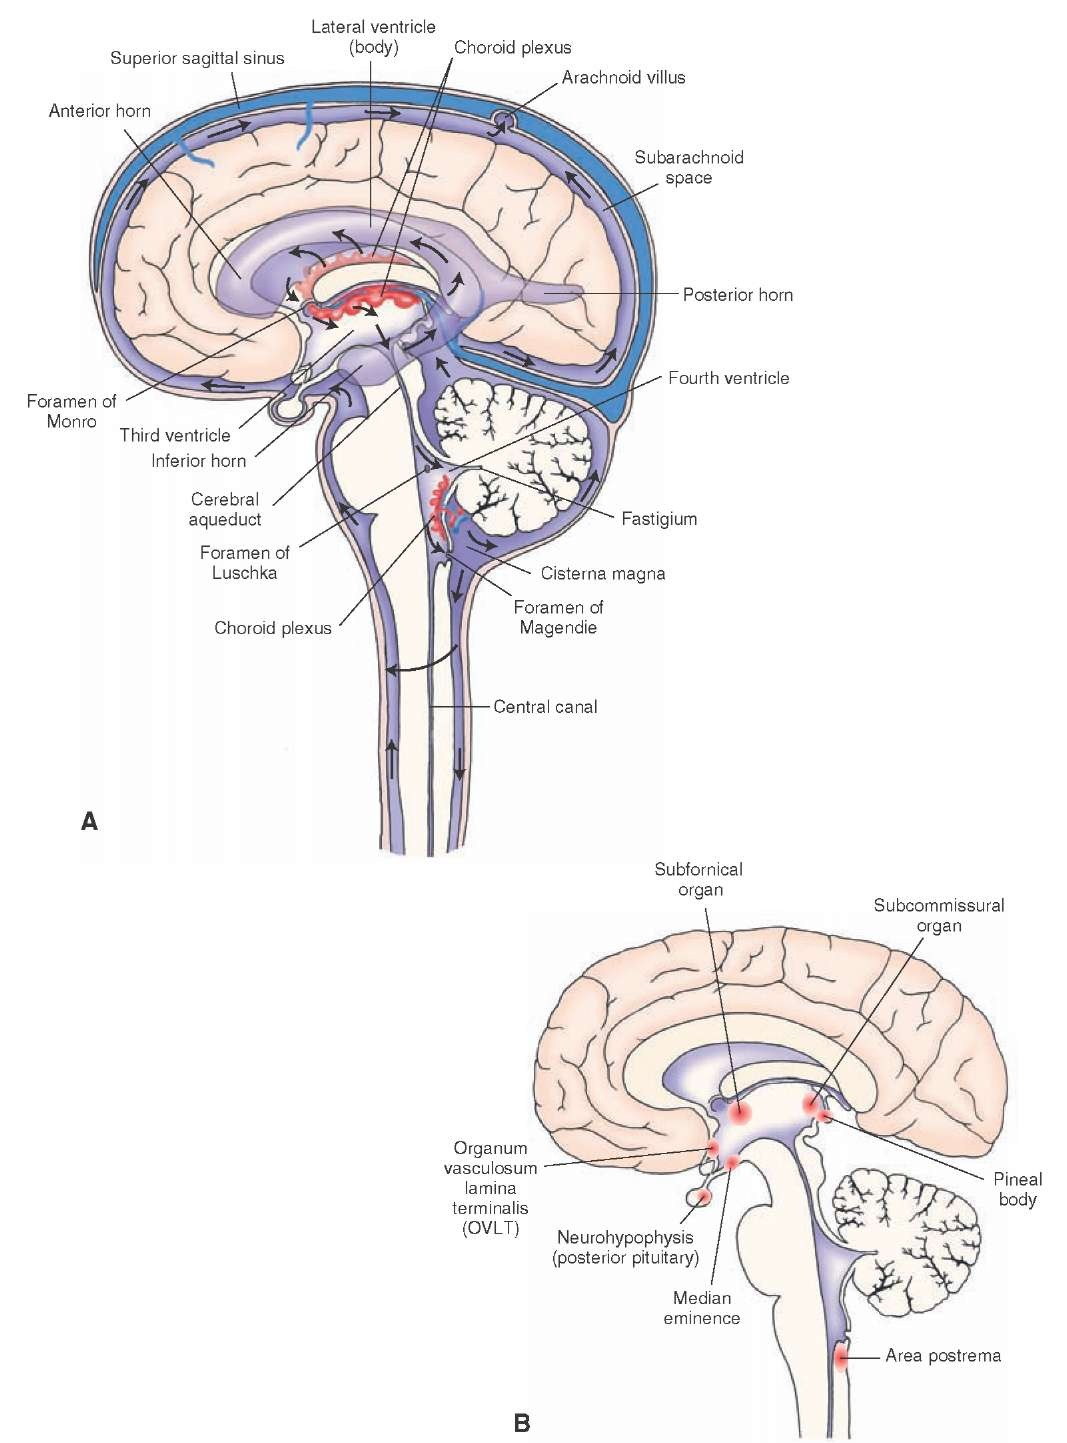 The location and connections between the ventricles of the brain. (A) Note the lateral ventricles (consisting of anterior, posterior, and inferior horns) and the third and fourth ventricles. Also, note the positioning of the choroid plexus. Black arrows indicate the flow of cerebrospinal fluid. (B) The location of circumventricular organs.